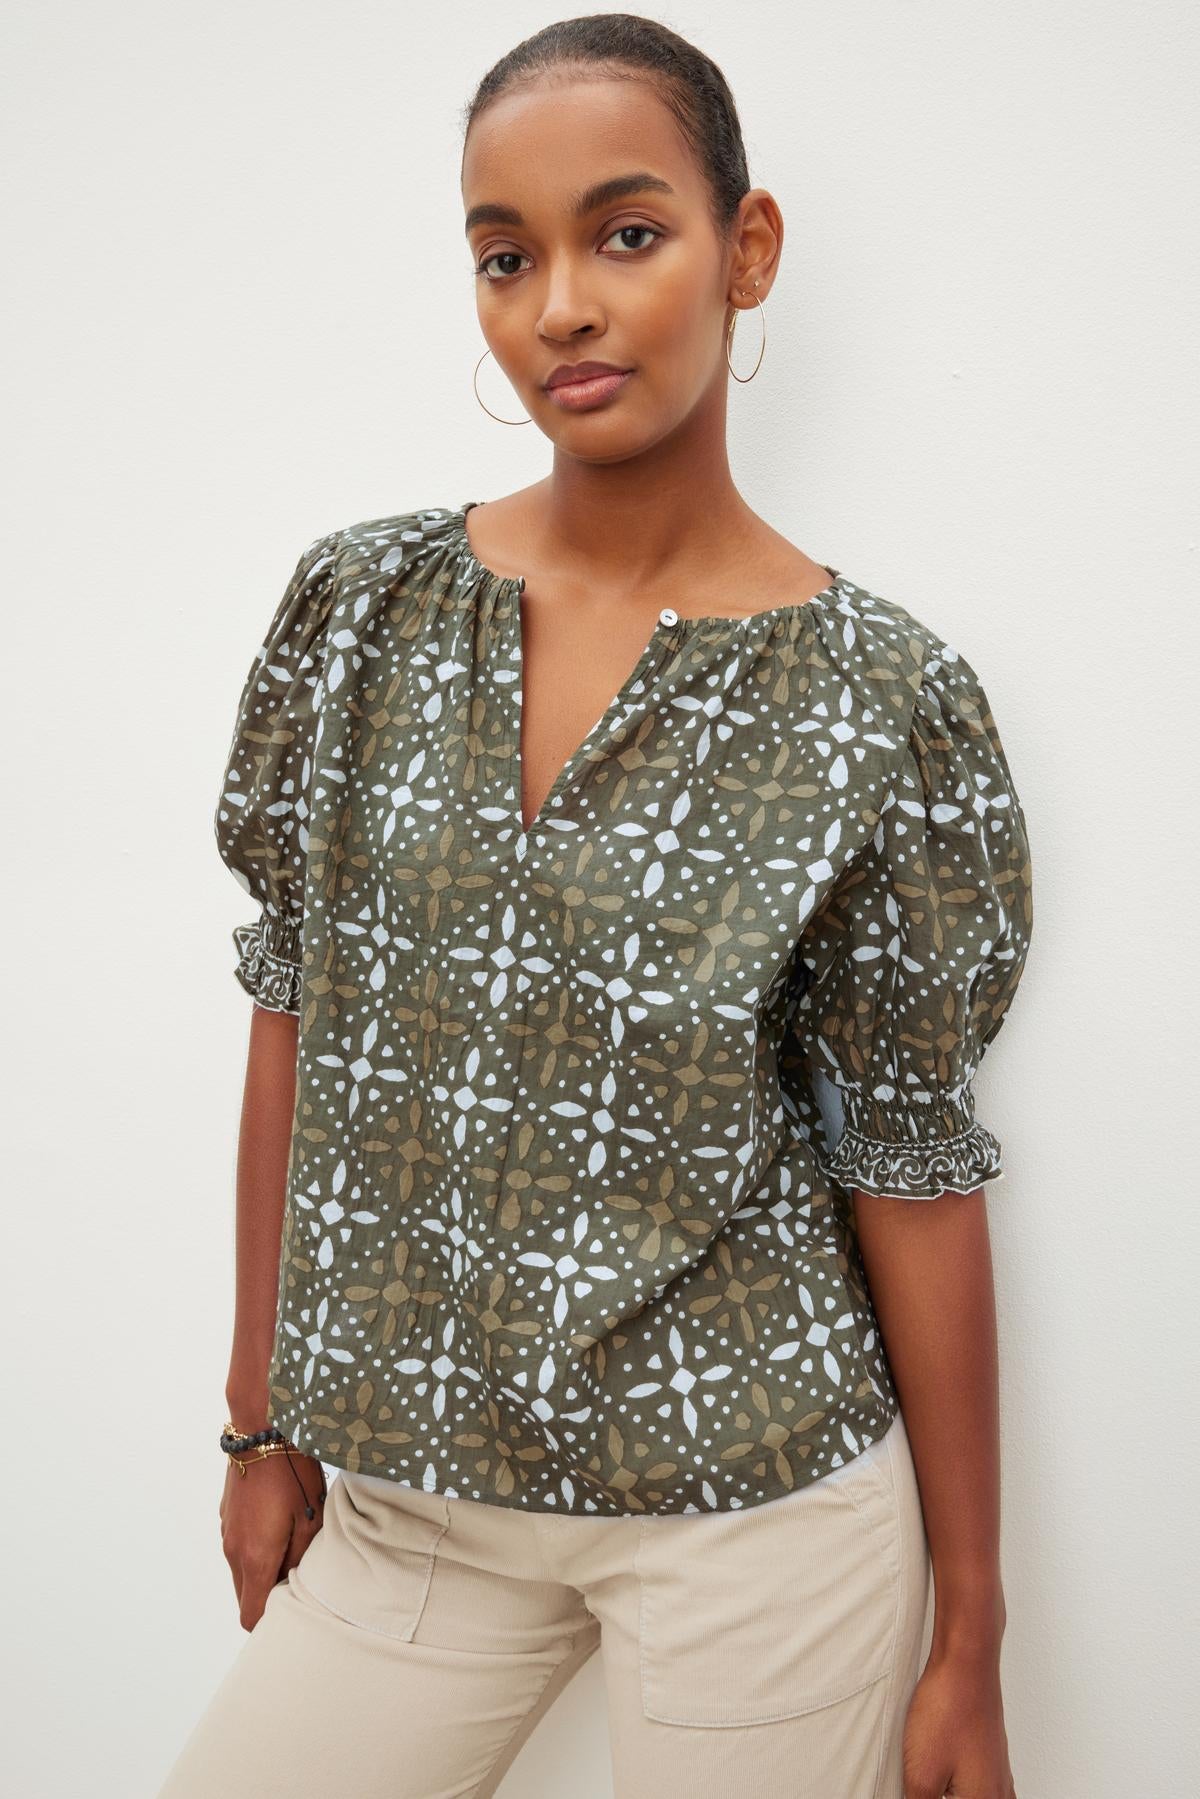   The model is wearing a Velvet by Graham & Spencer ALEX PRINTED BLOUSE. 